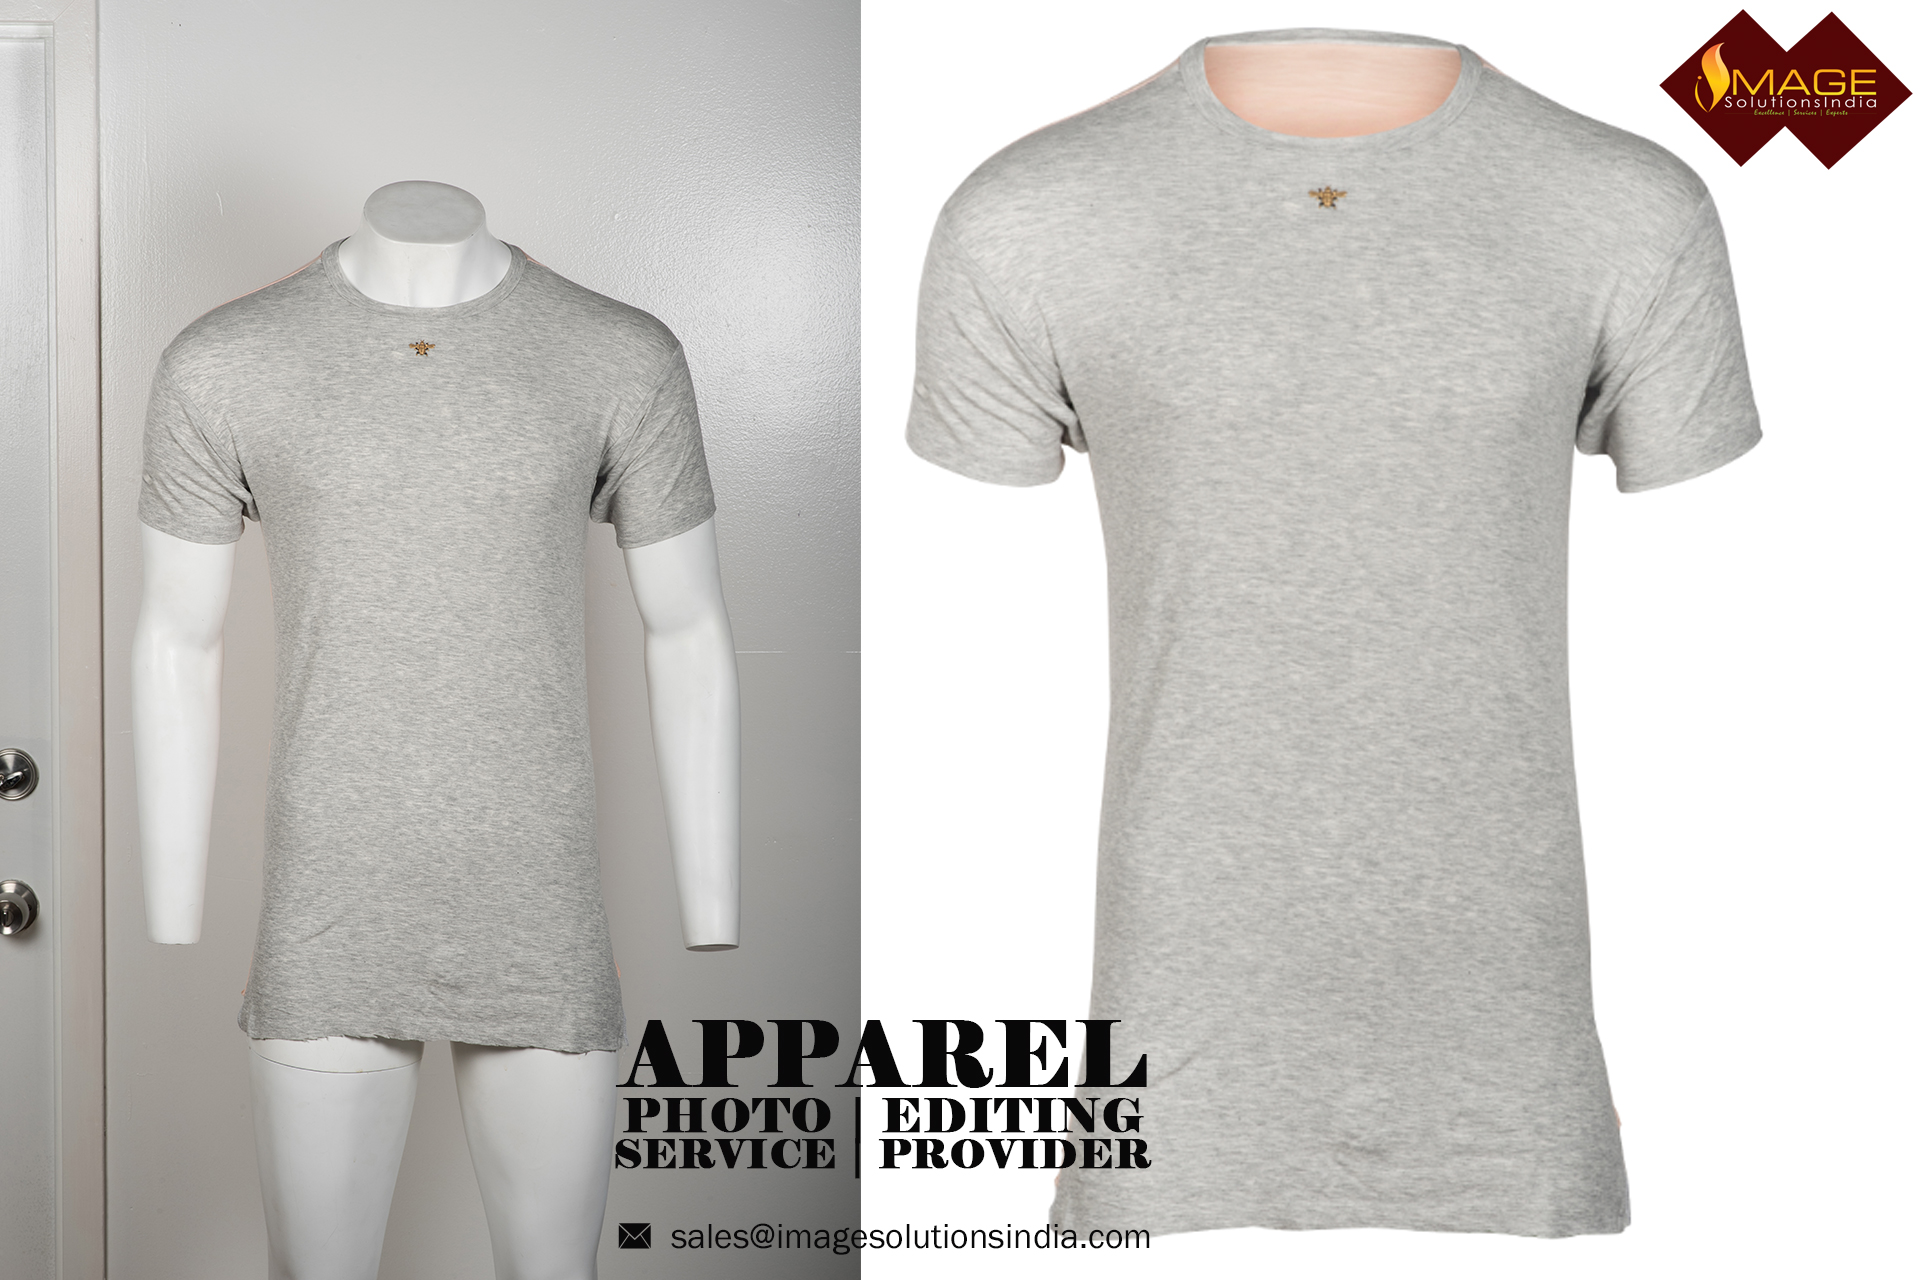 Apparel Photo Editing Services - Ghost Mannequin Editing Services for Apparel/Clothing Products